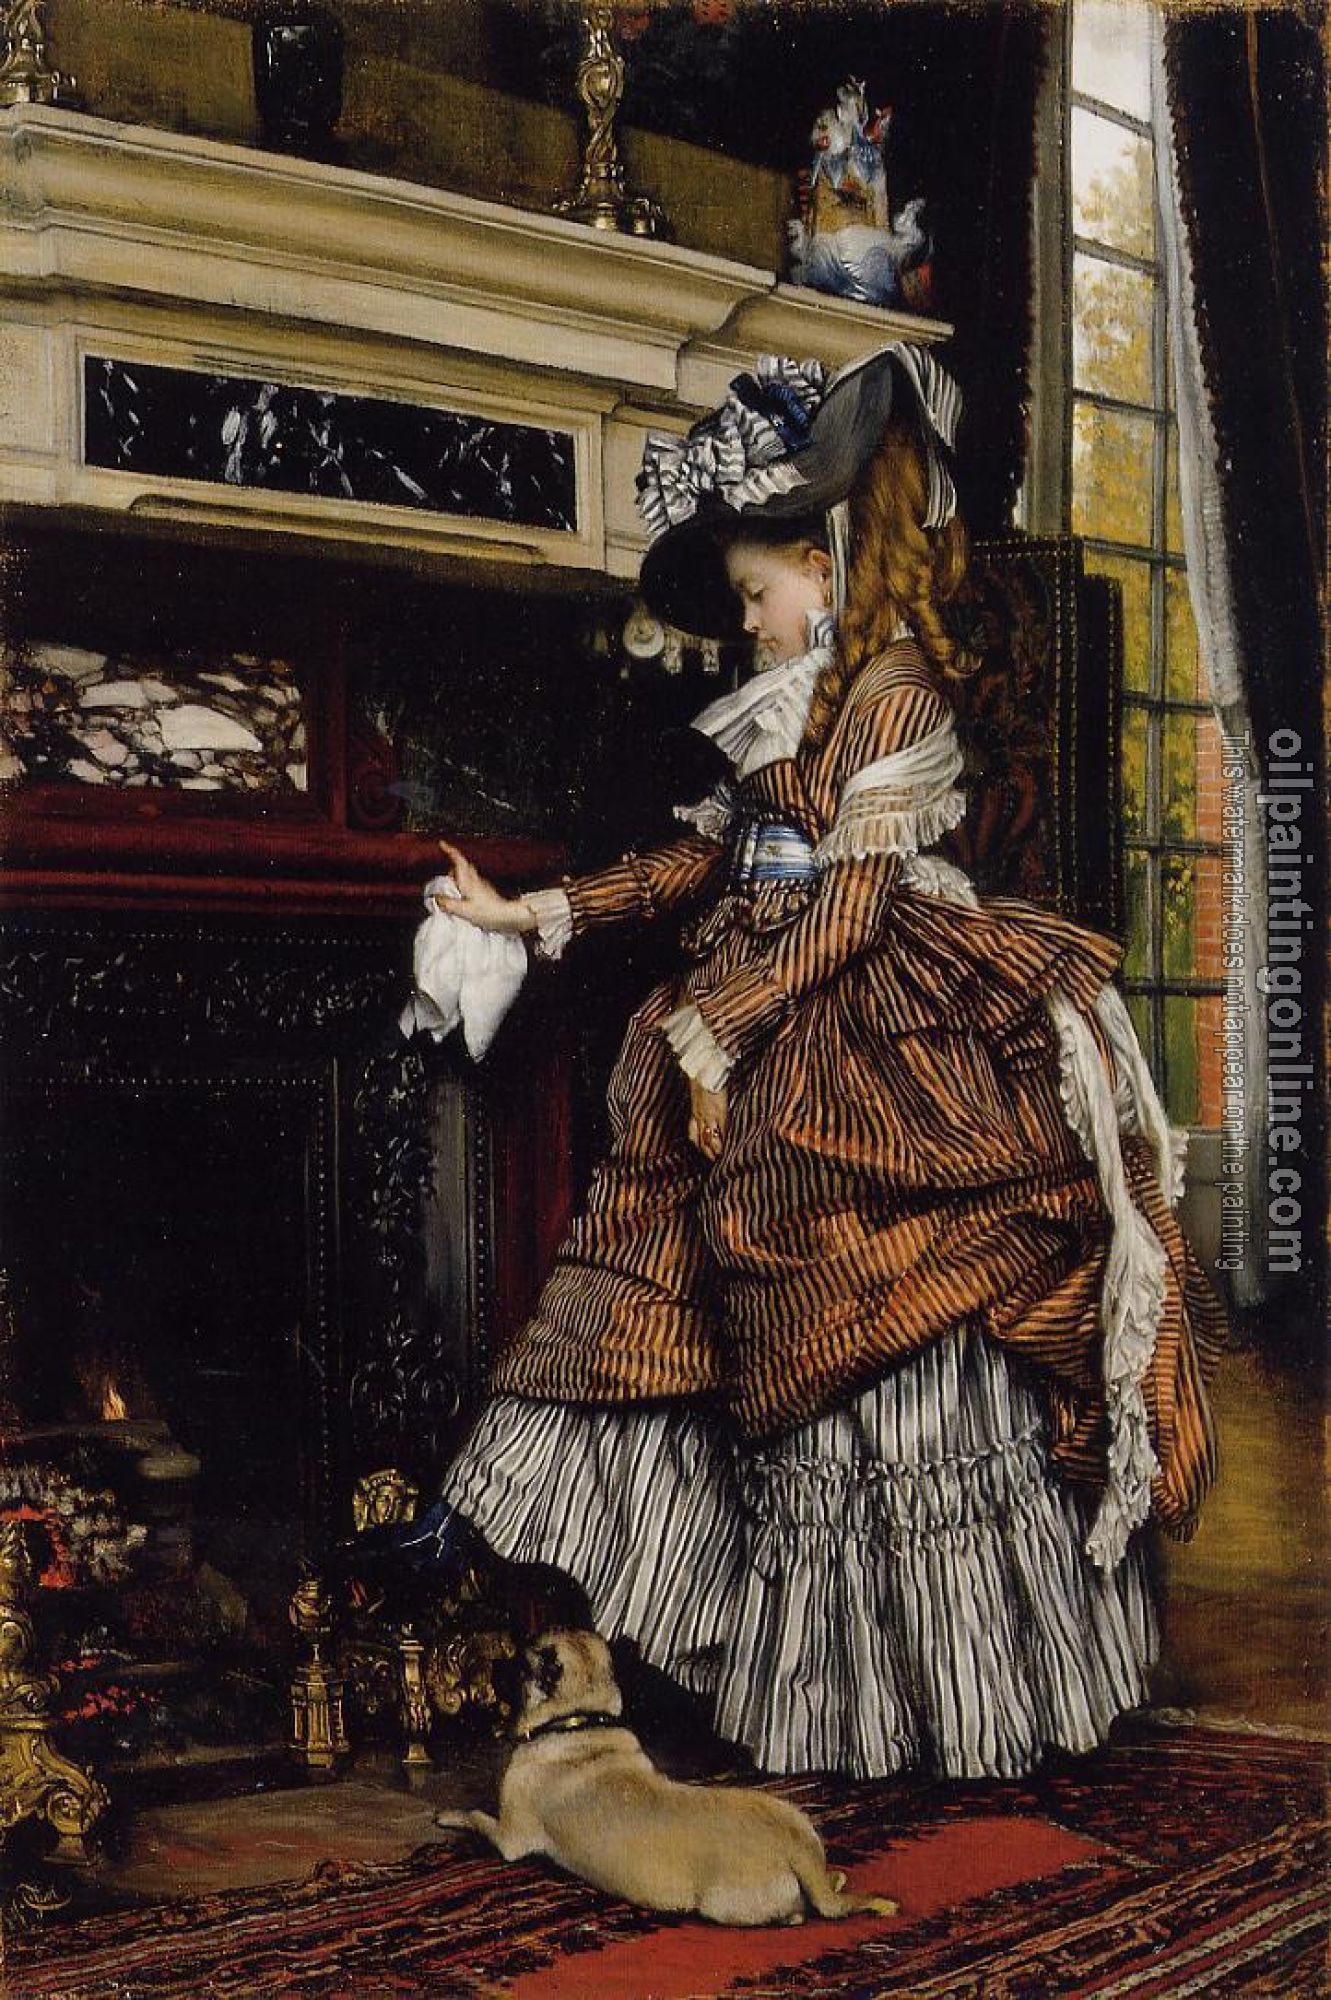 Tissot, James - The Fireplace